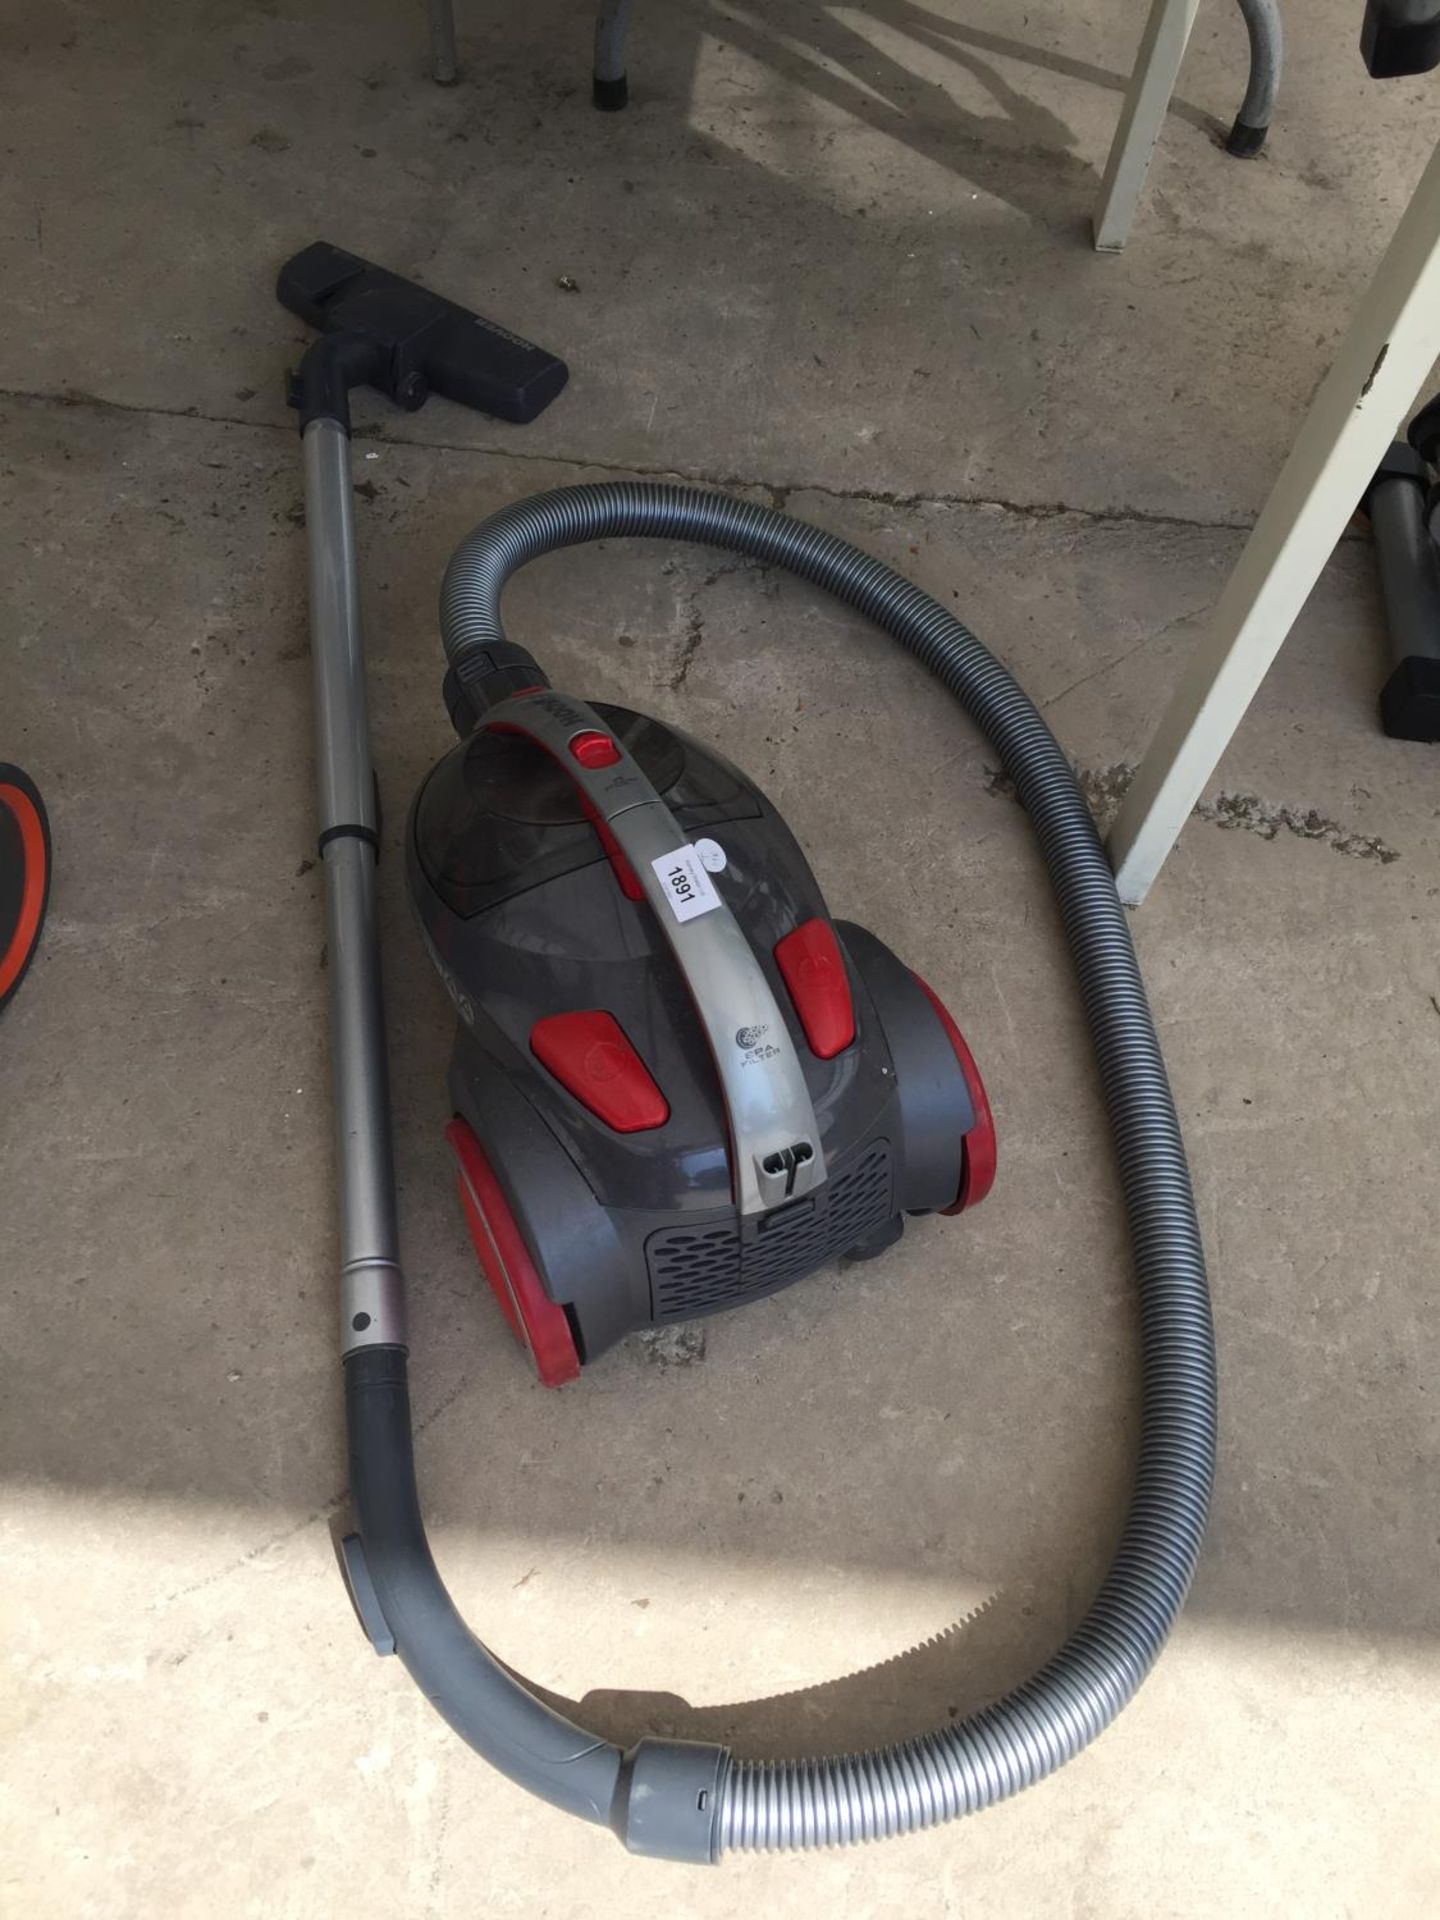 A HOOVER WHIRLWIND VACUUM CLEANER